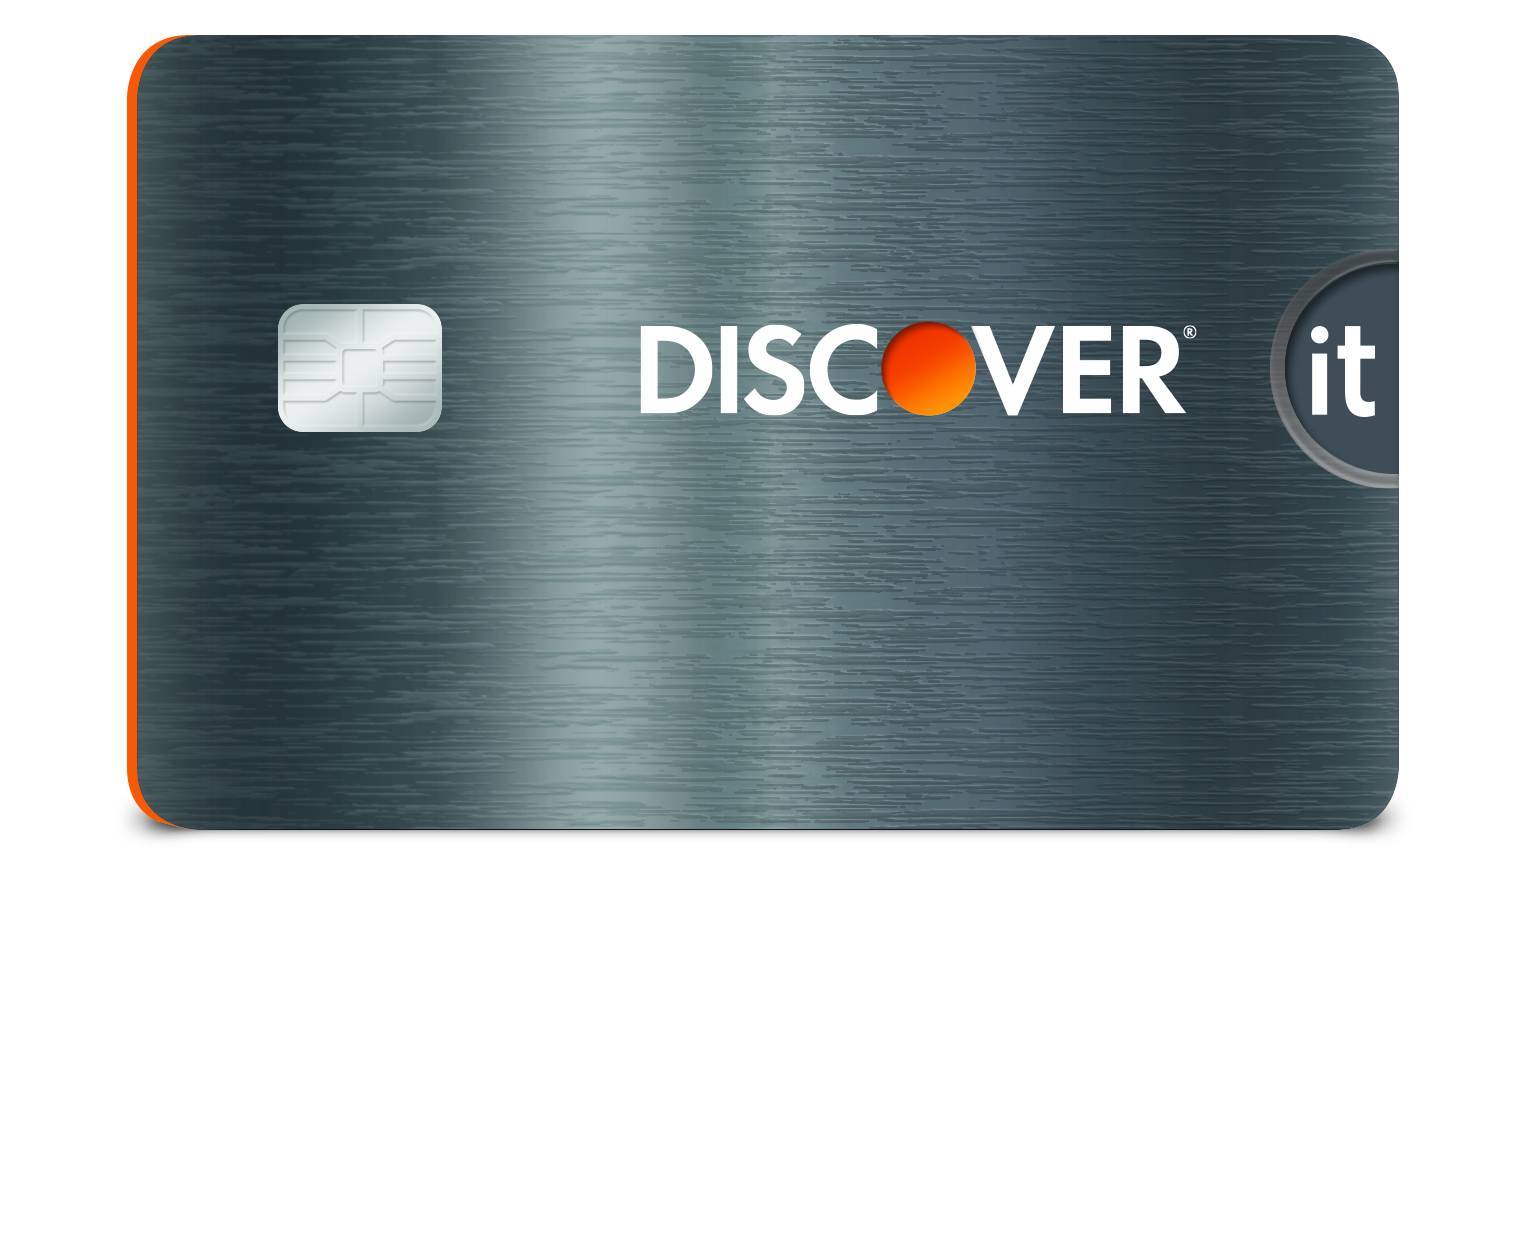 discover it credit card, credit card cashback, cash back reward, credit cards with no annual fee